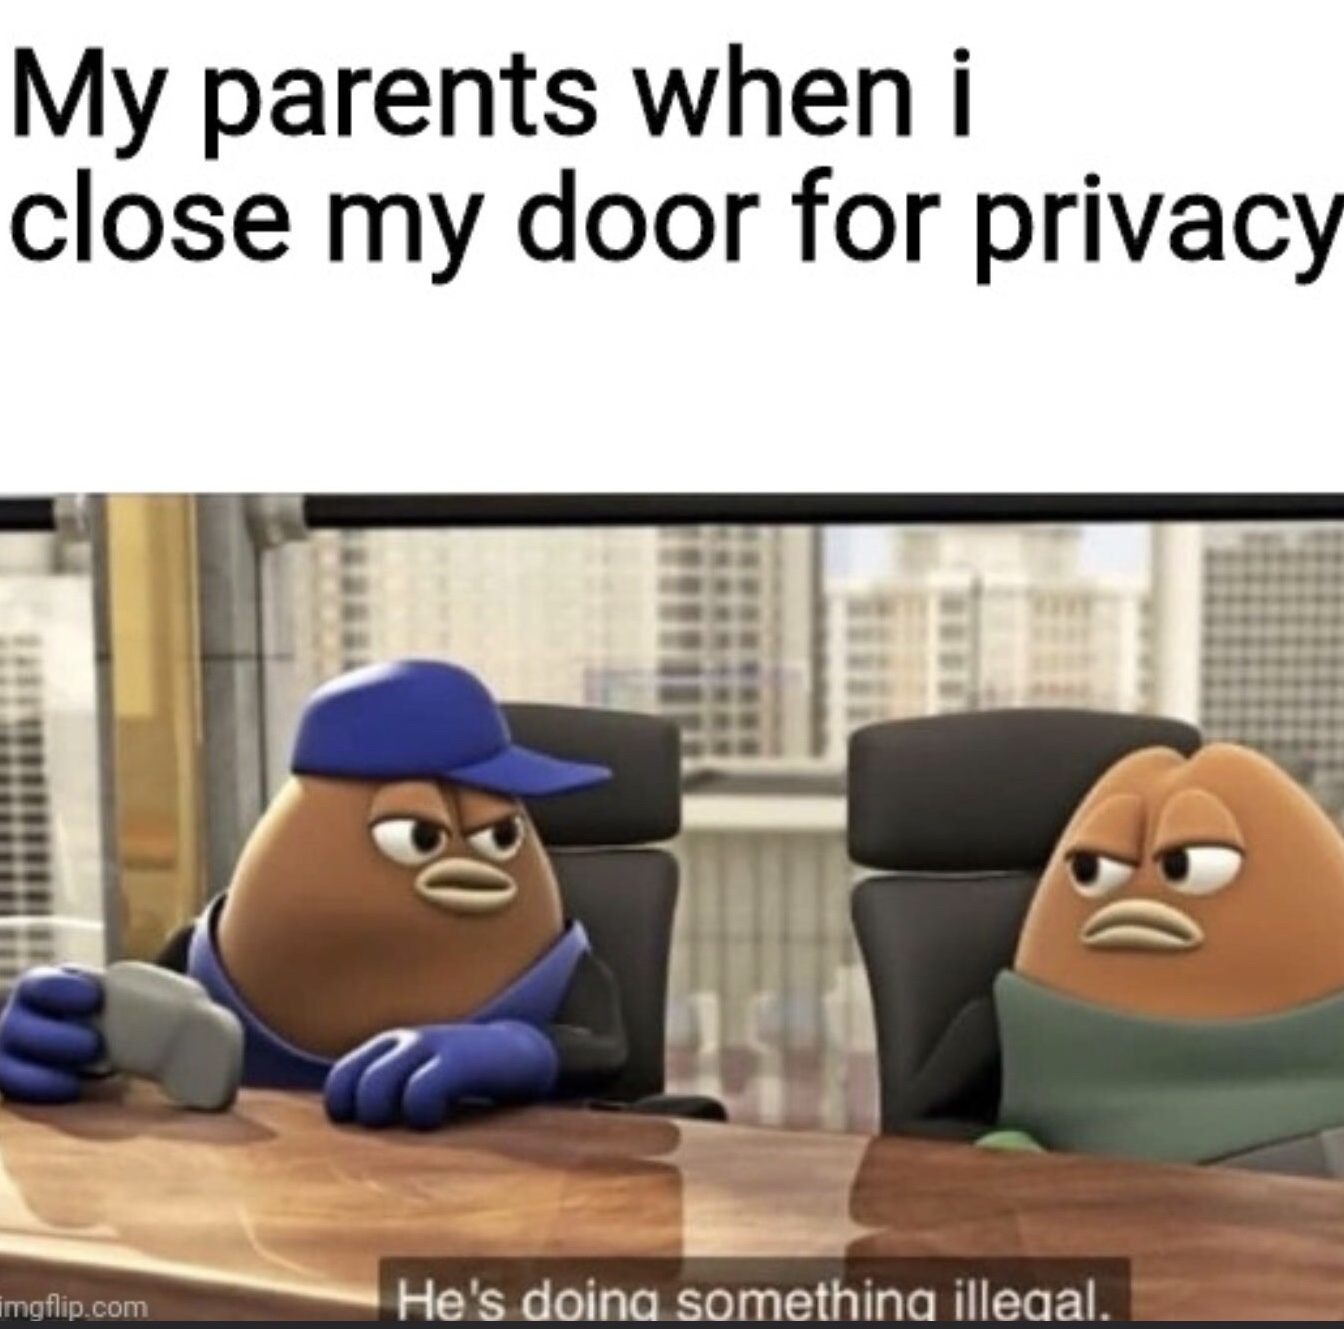 killer bean meme - My parents when i close my door for privacy imgflip.com He's doing something illegal.